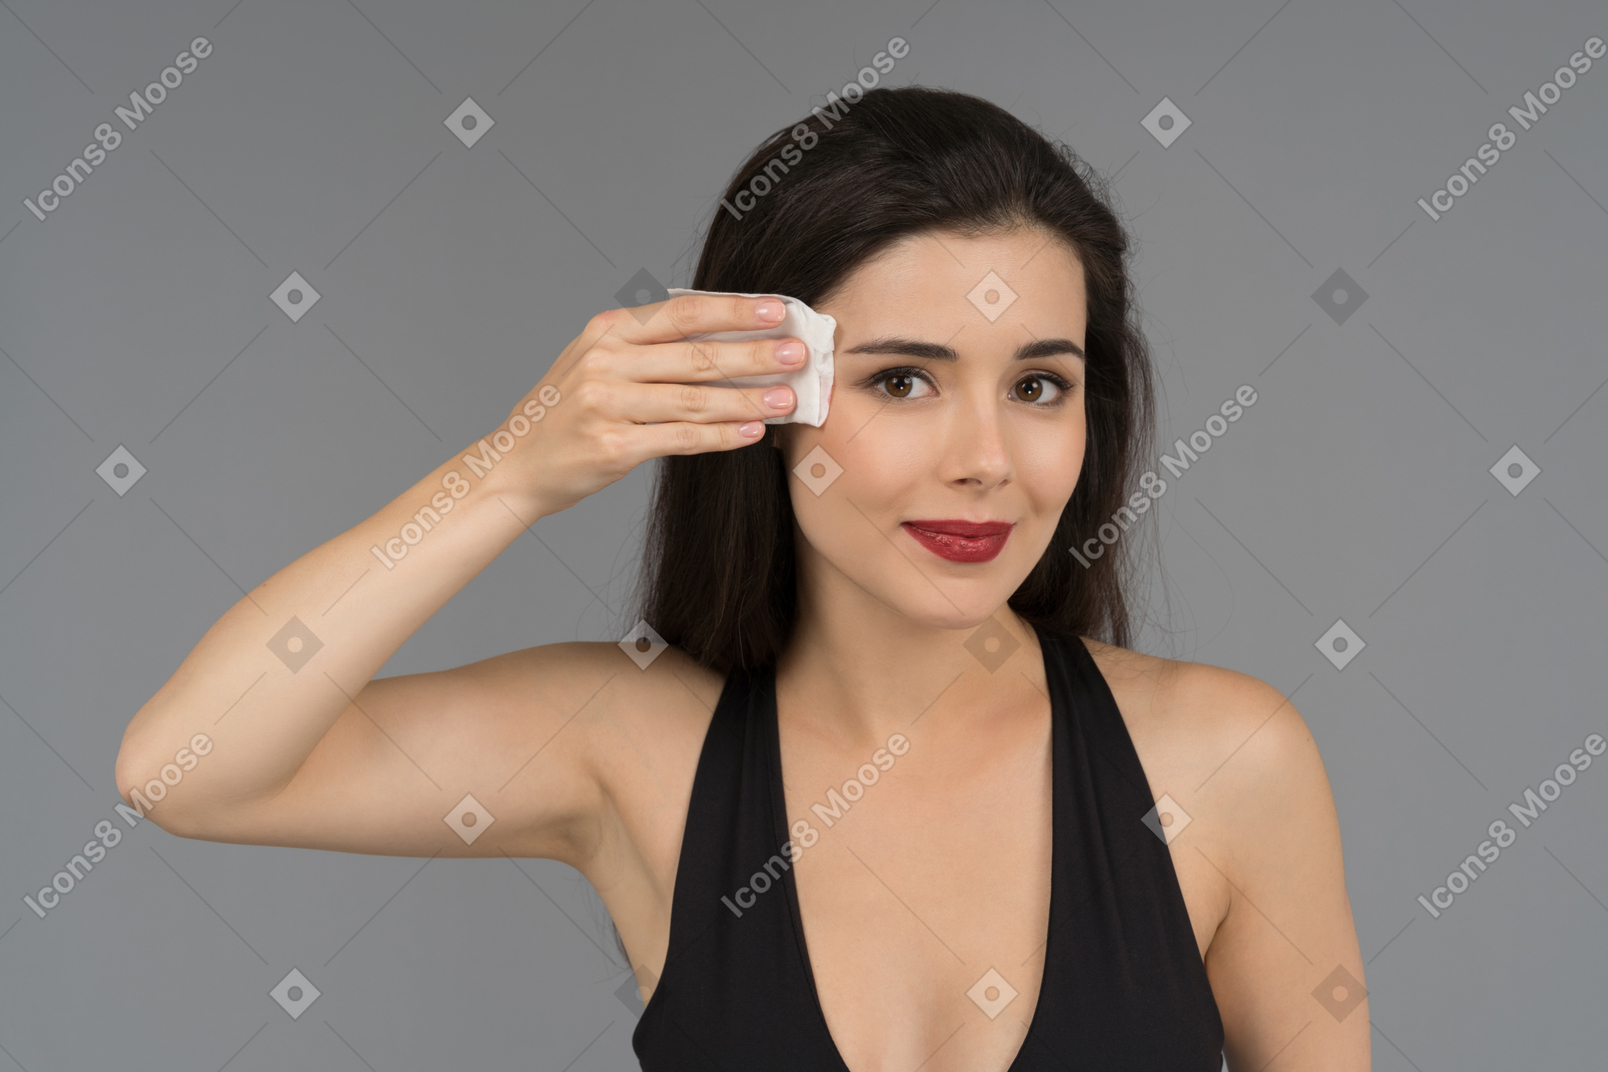 A cheerful woman wiping face